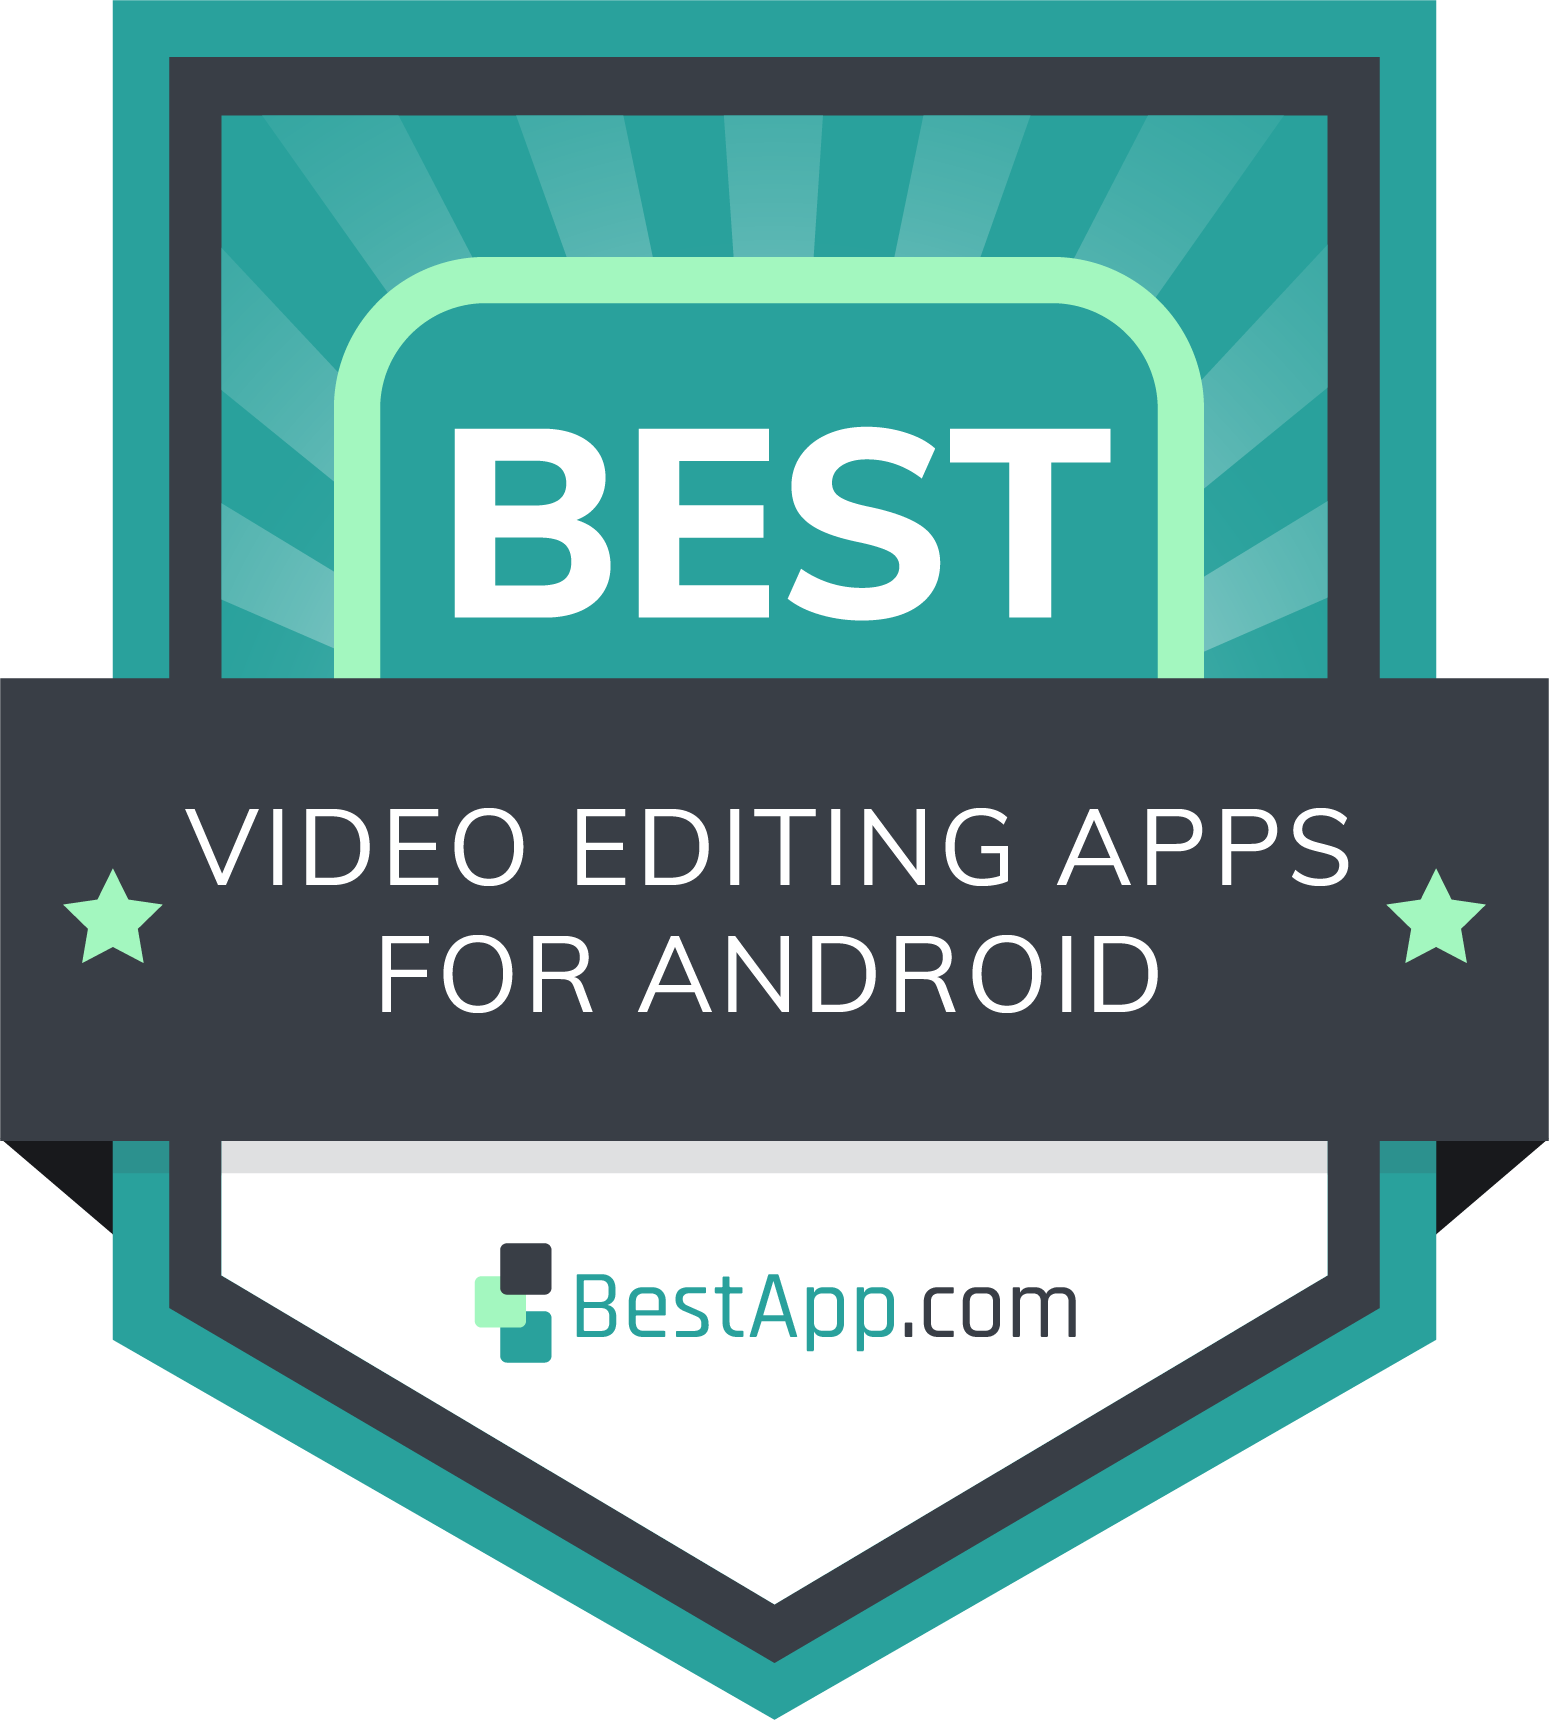 Best Video Editing Apps for Android Badge